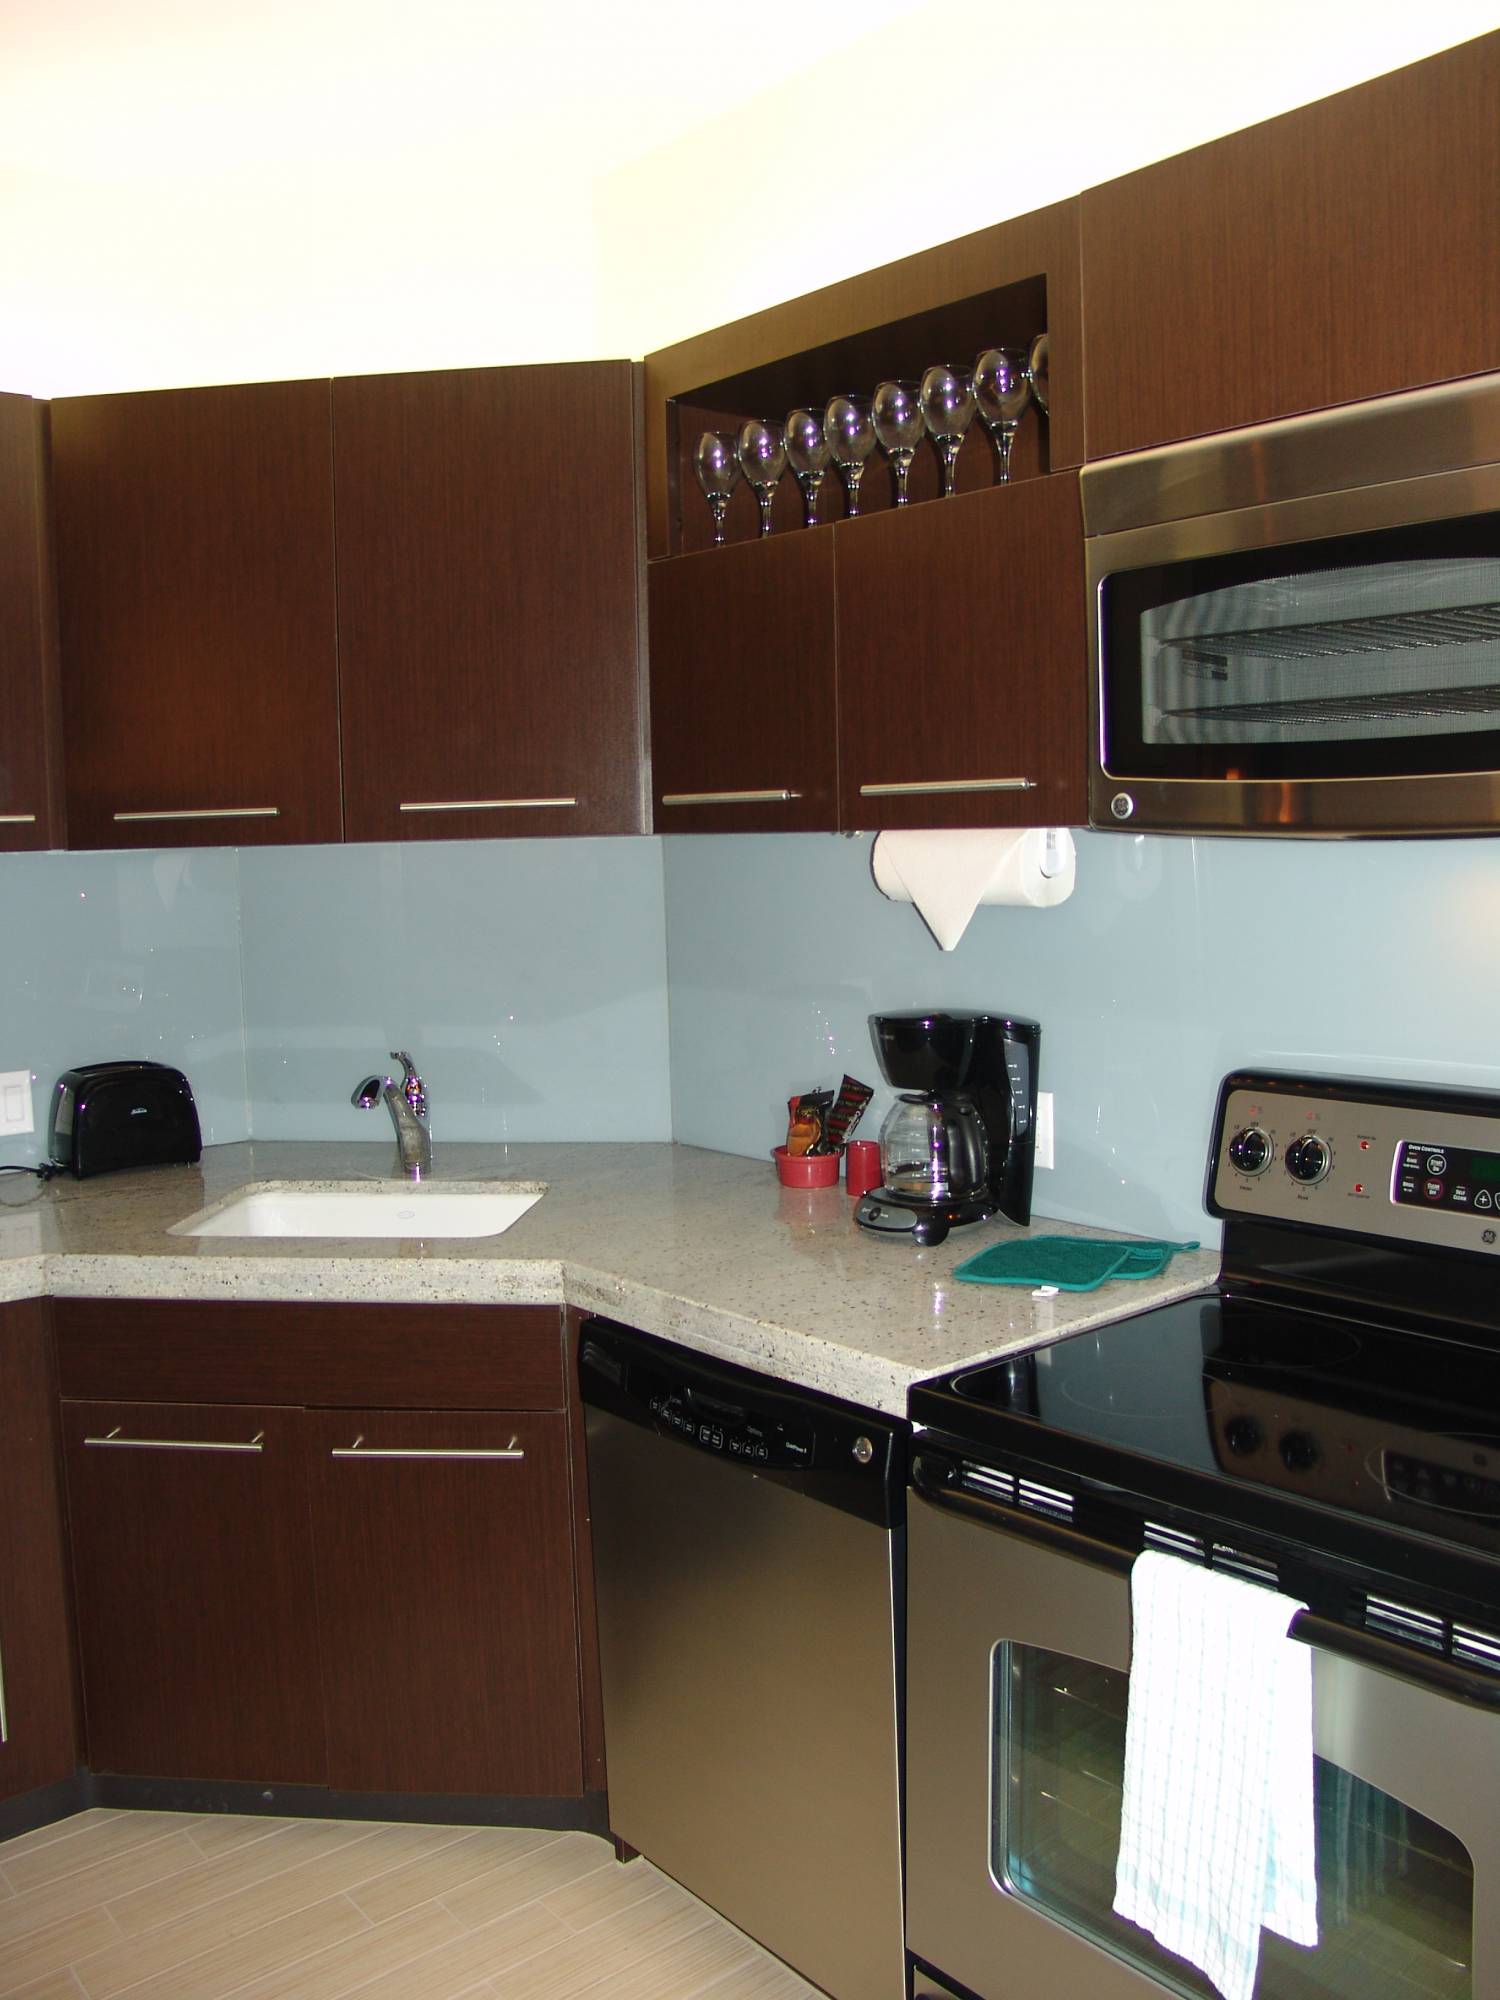 Bay Lake Tower - kitchen in model rooms